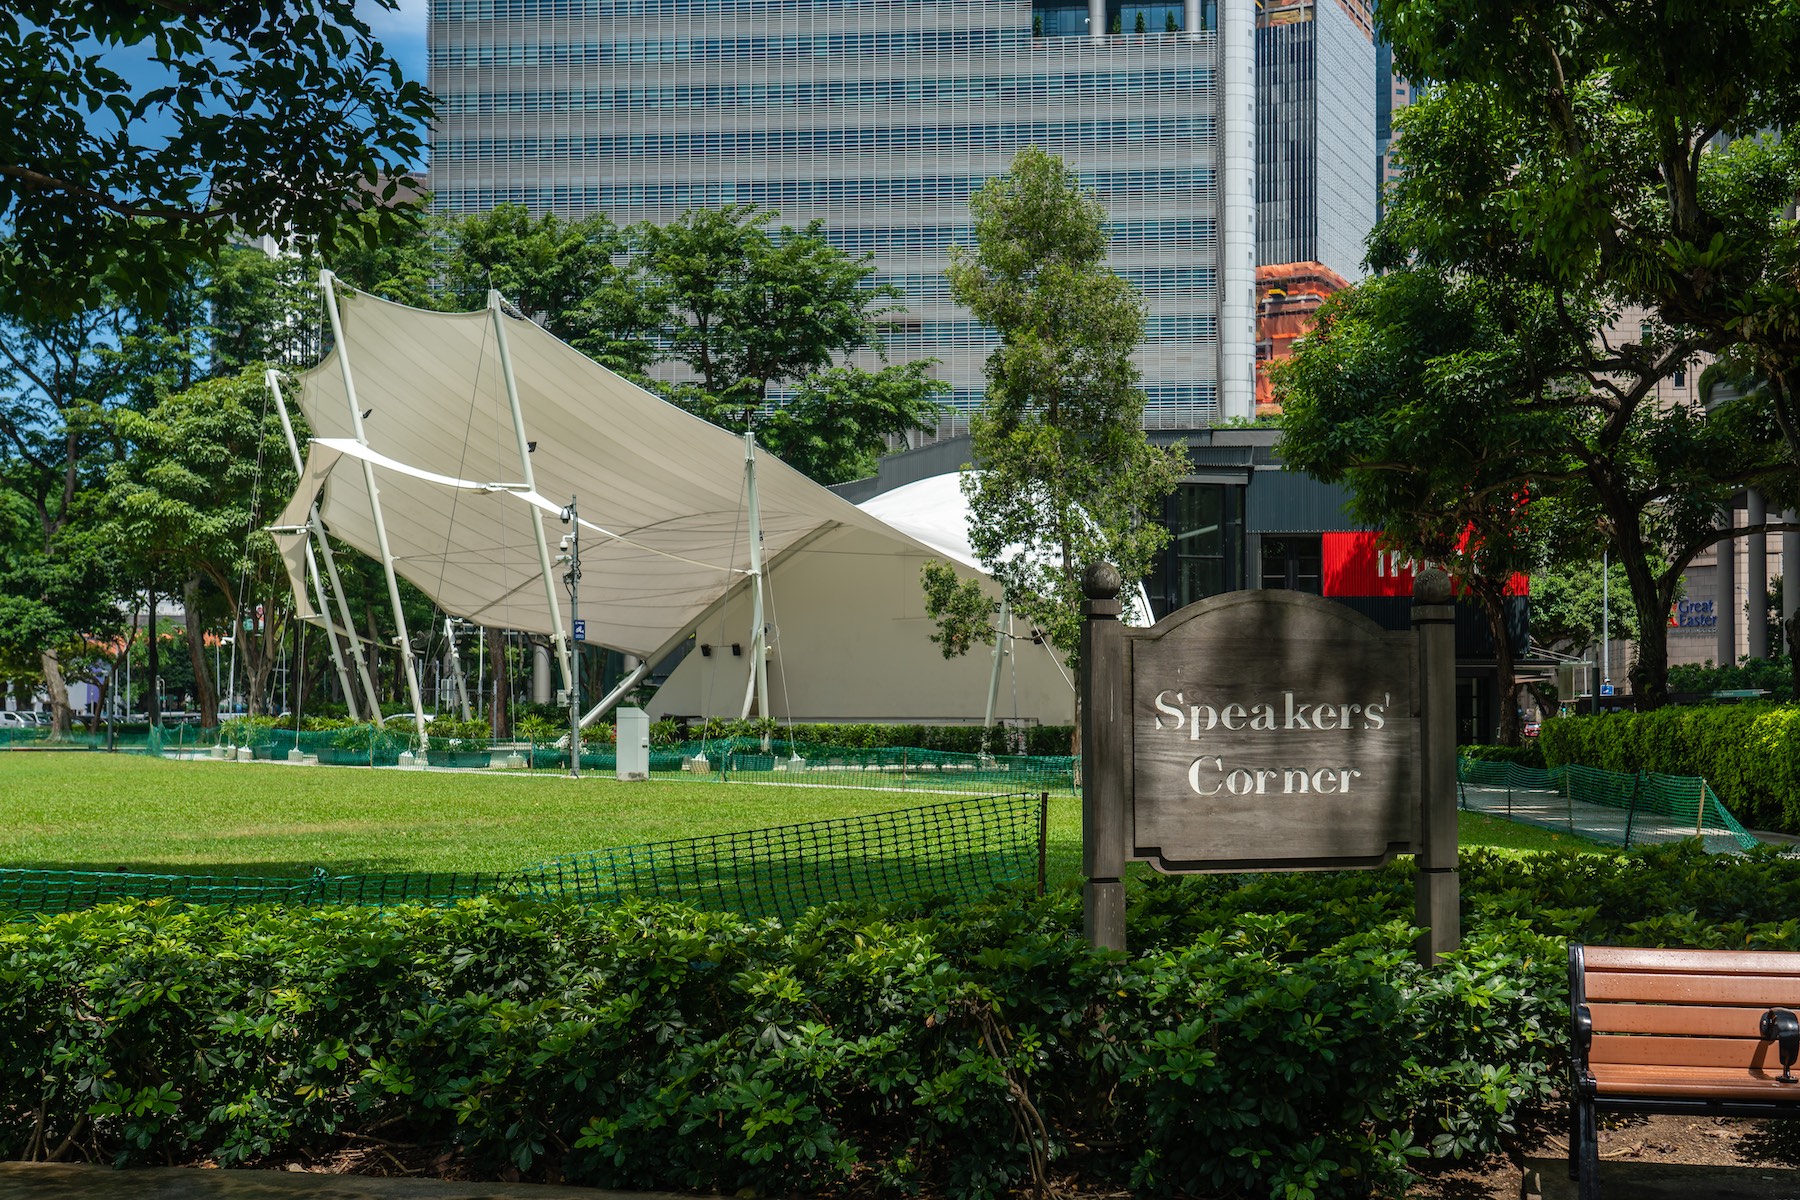 Speakers' Corner in Hong Lim Park, Singapore is designated by a wooden sign and a large white stage